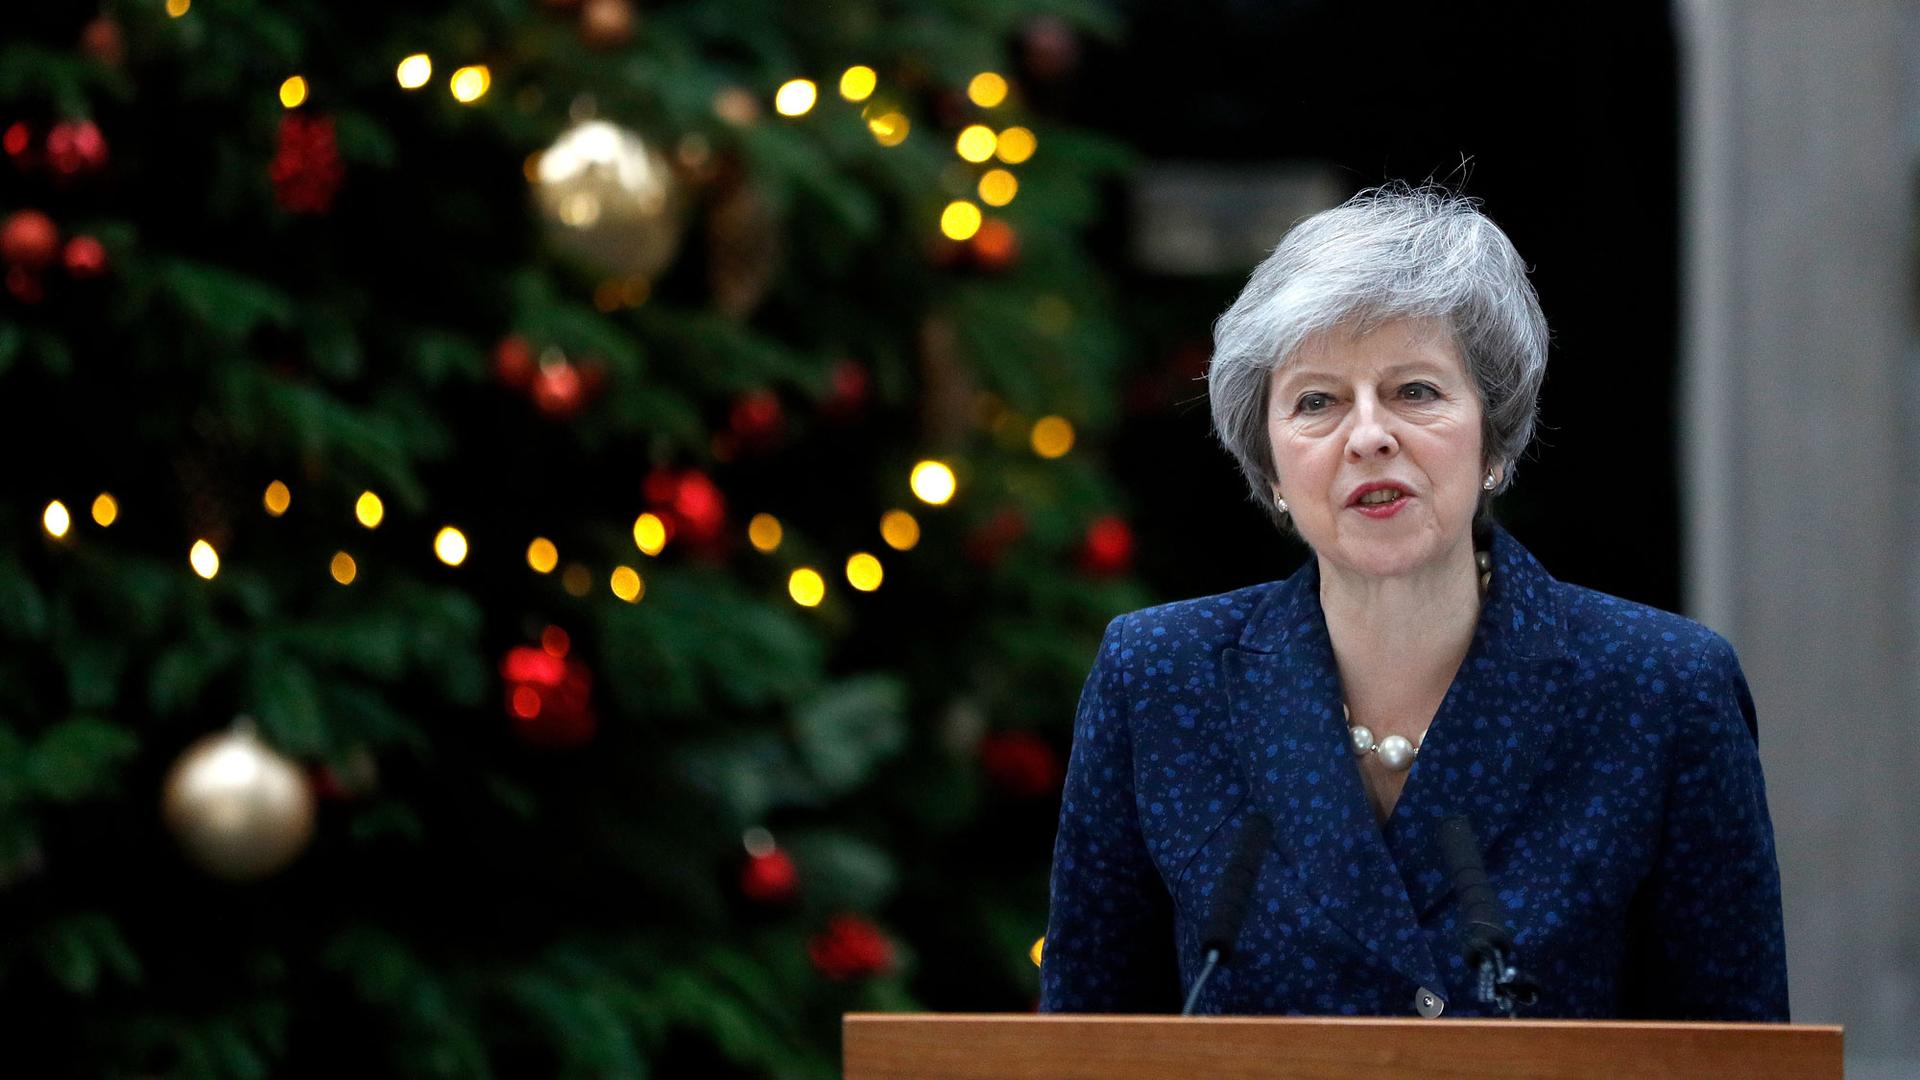 Britain's Prime Minister Theresa May is shown standing at a podium with Christmas decorations behind her.